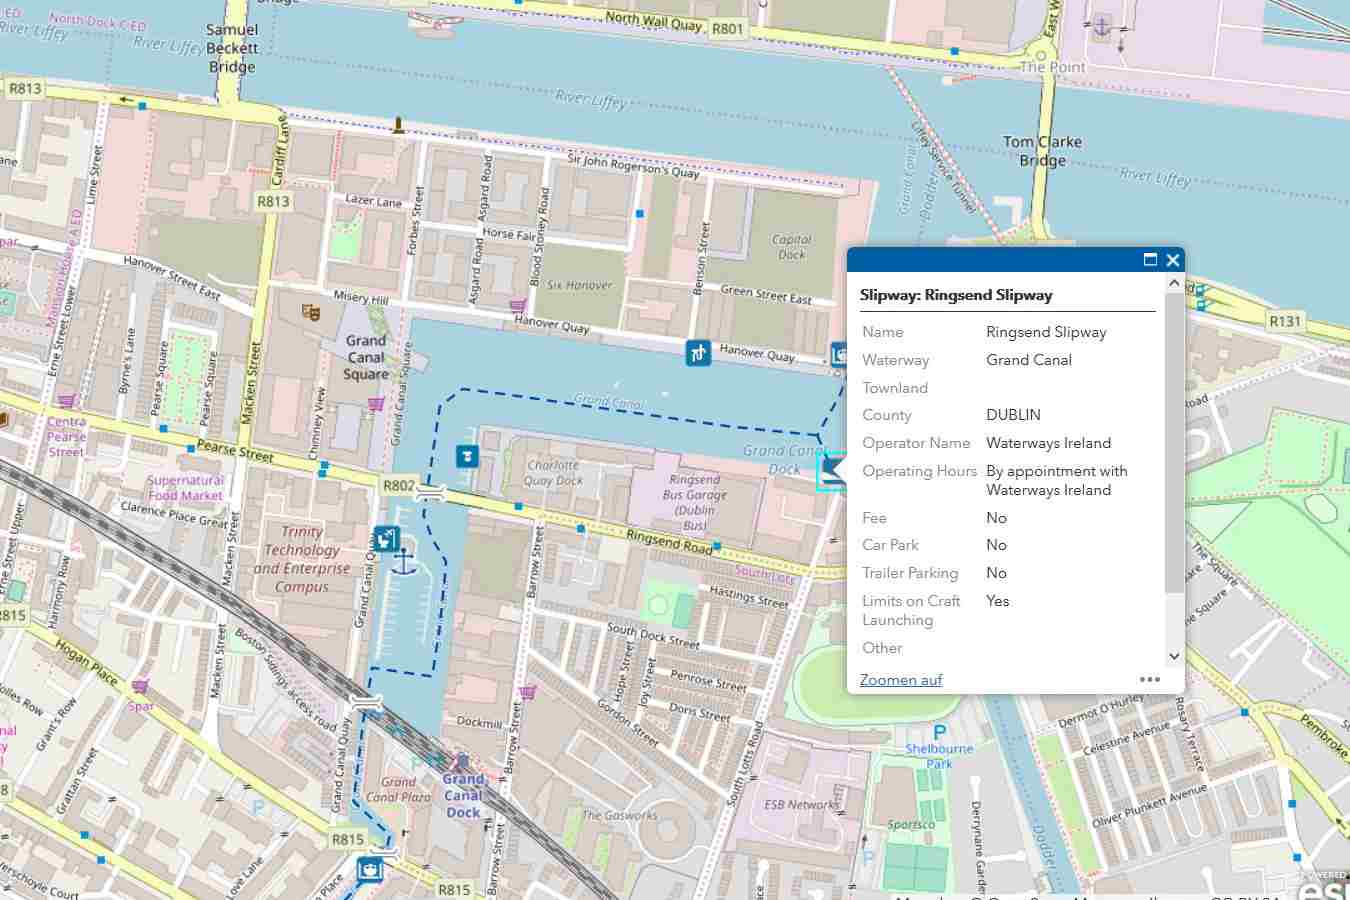 ArcGis-Map Dublin Docks Grand Canal click to "Navigation Guide Waterwaysireland"